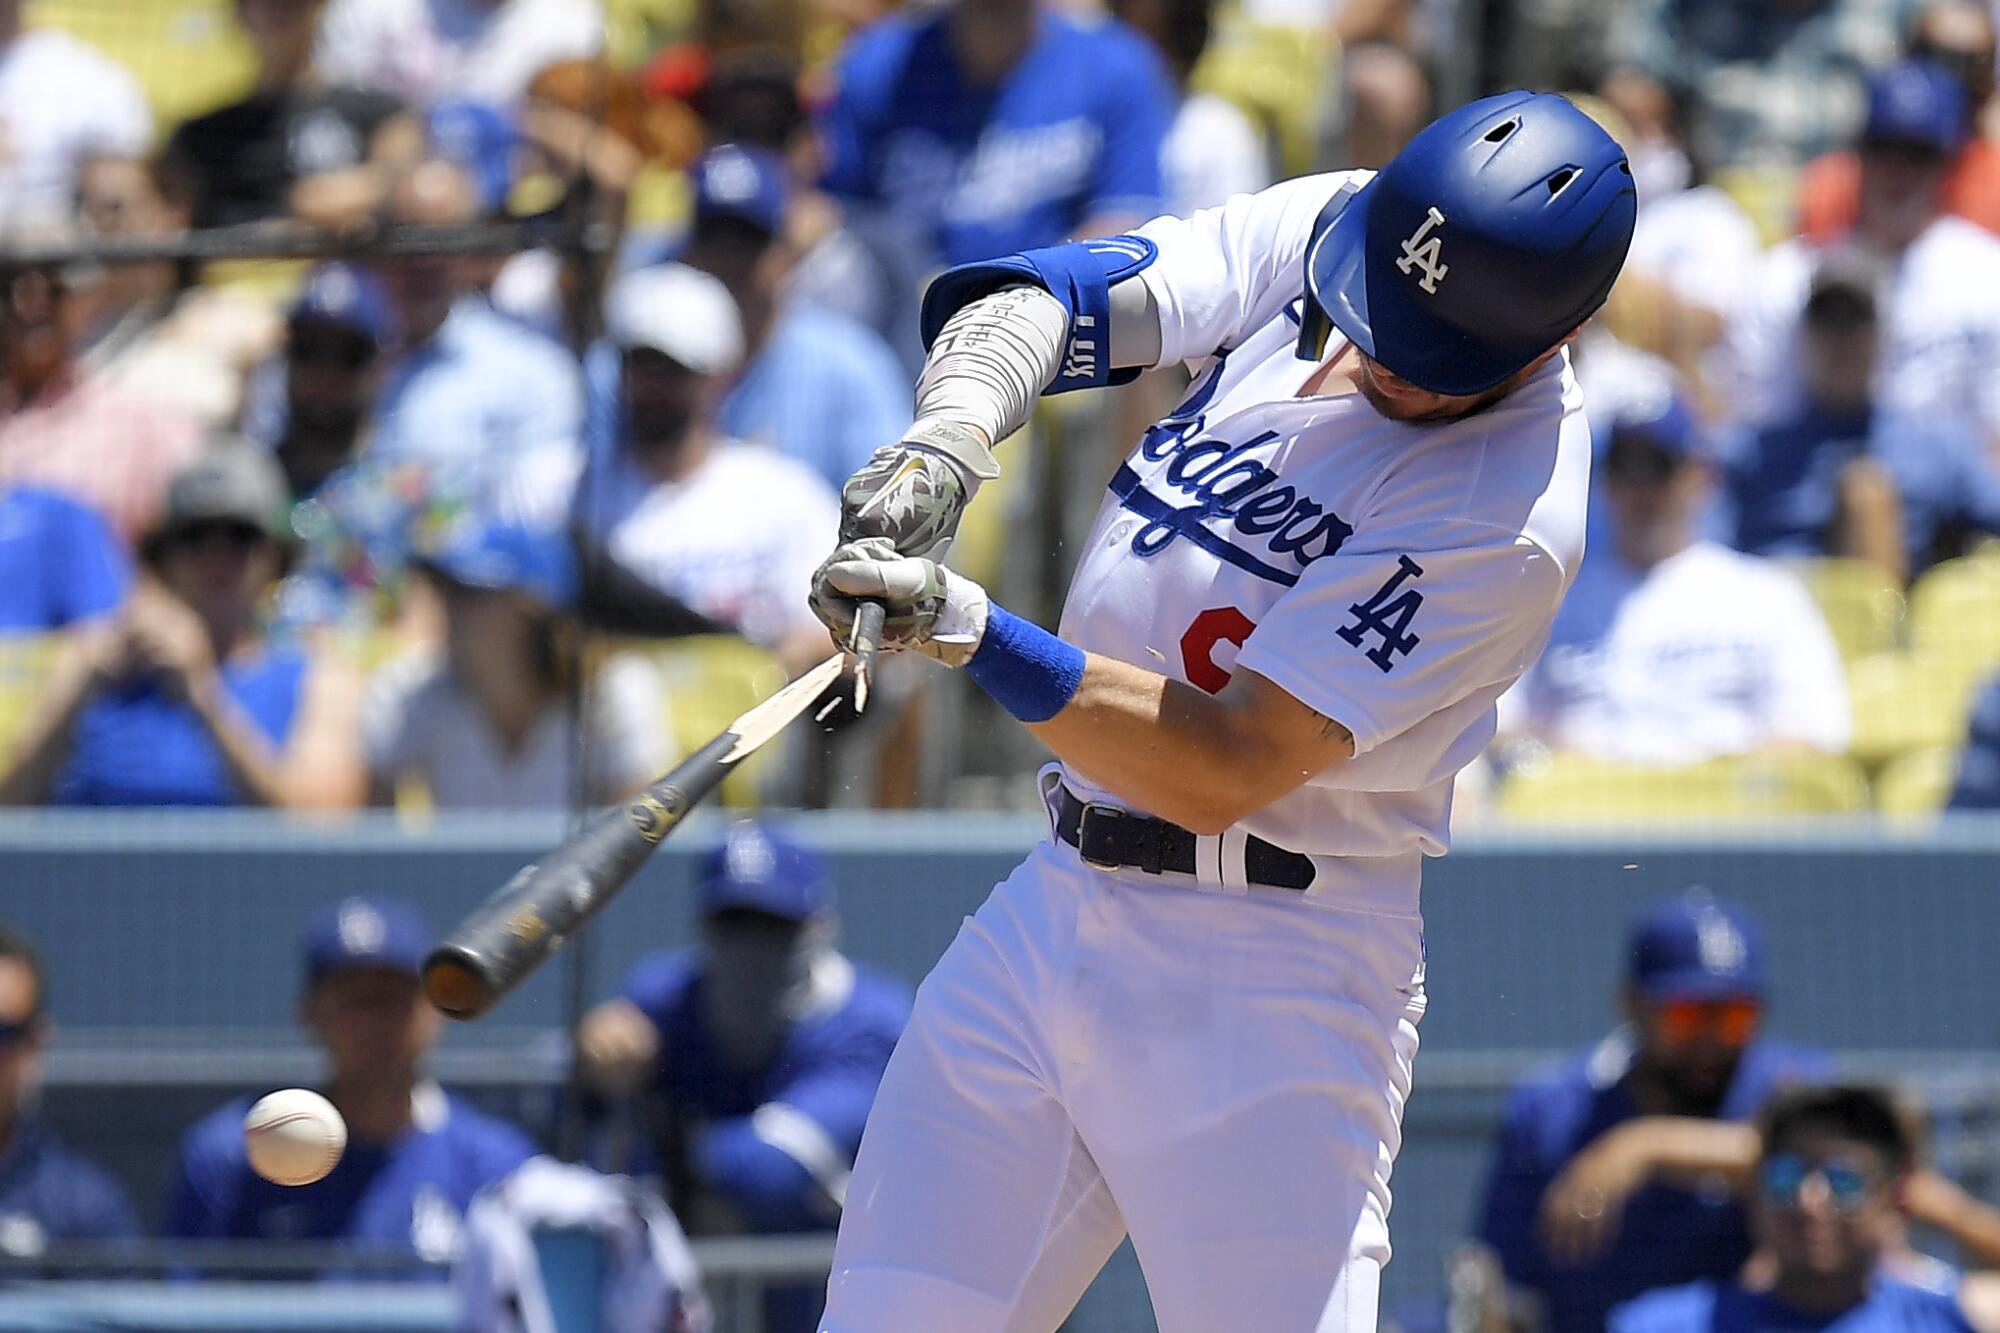 Dodgers' comeback cut short by questionable strike call with